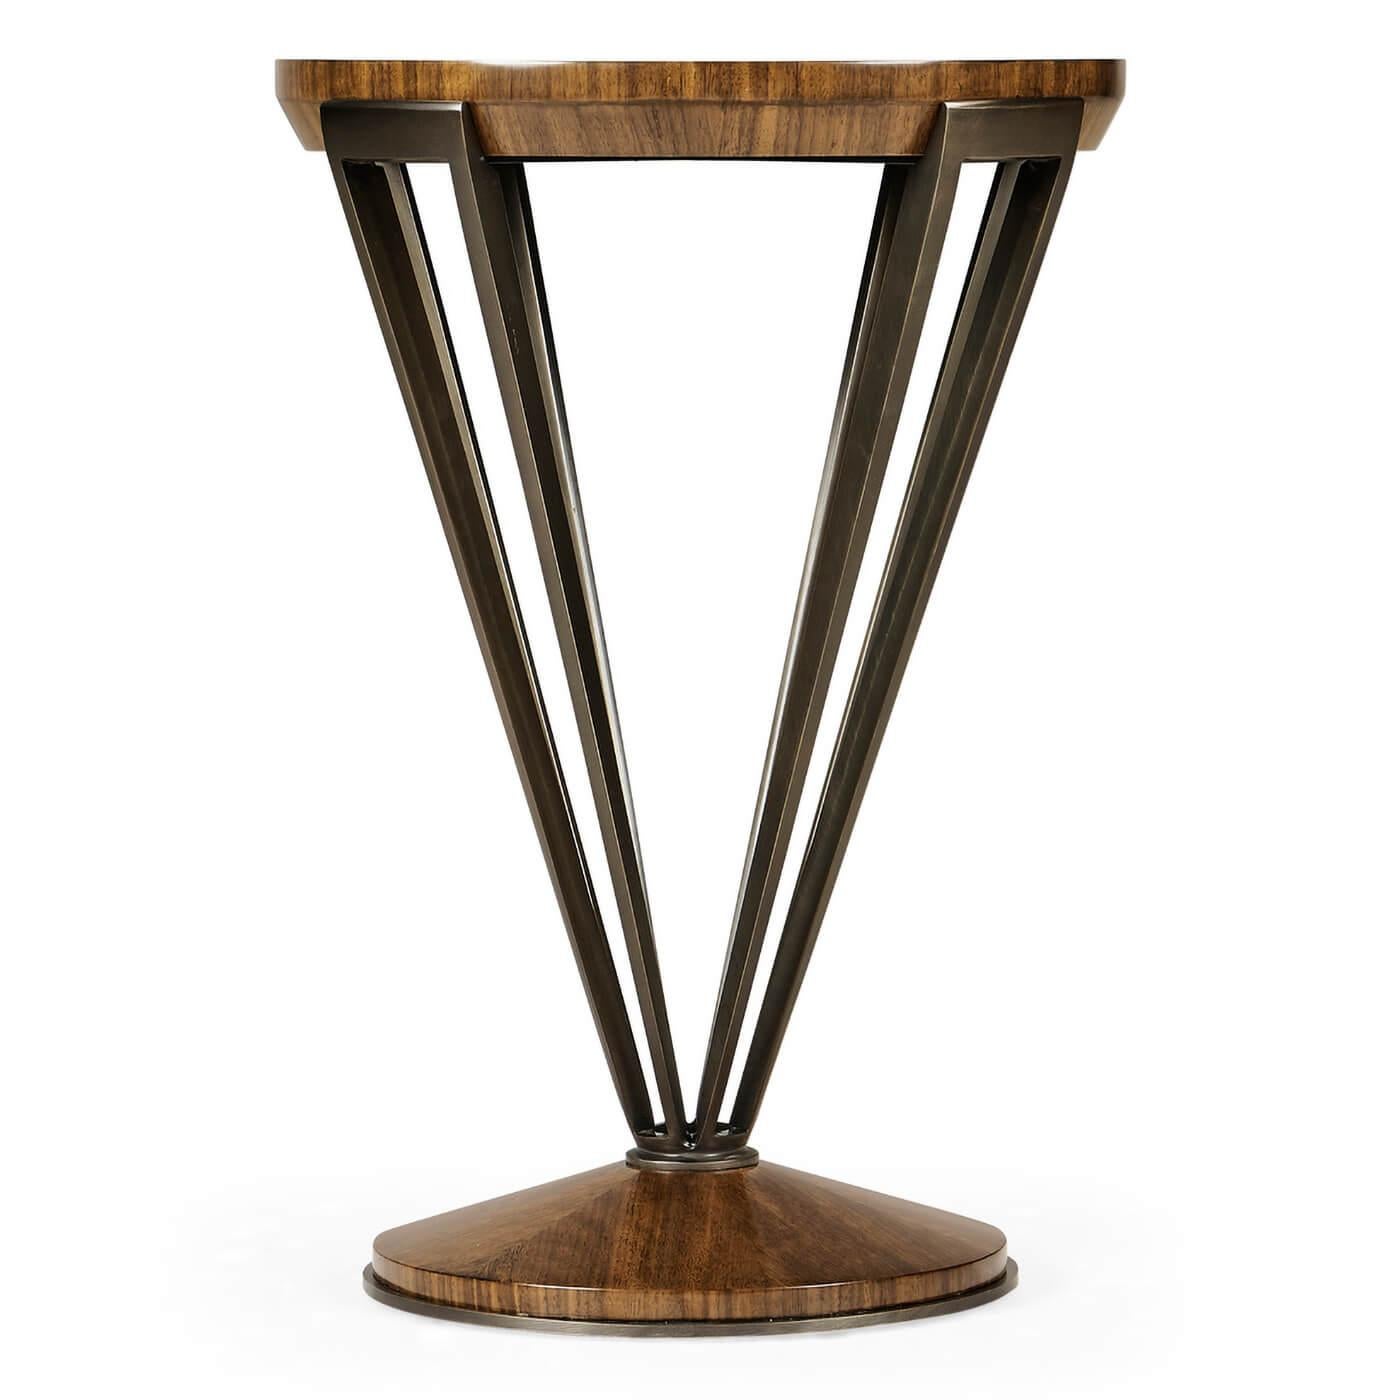 French Art Deco style drinks table with a walnut rayed top with a transparent lacquer finish with a brass tapered pedestal having an acid dipped and hand-rubbed finish creating a wonderful soft patina.

Dimensions: 15 3/8